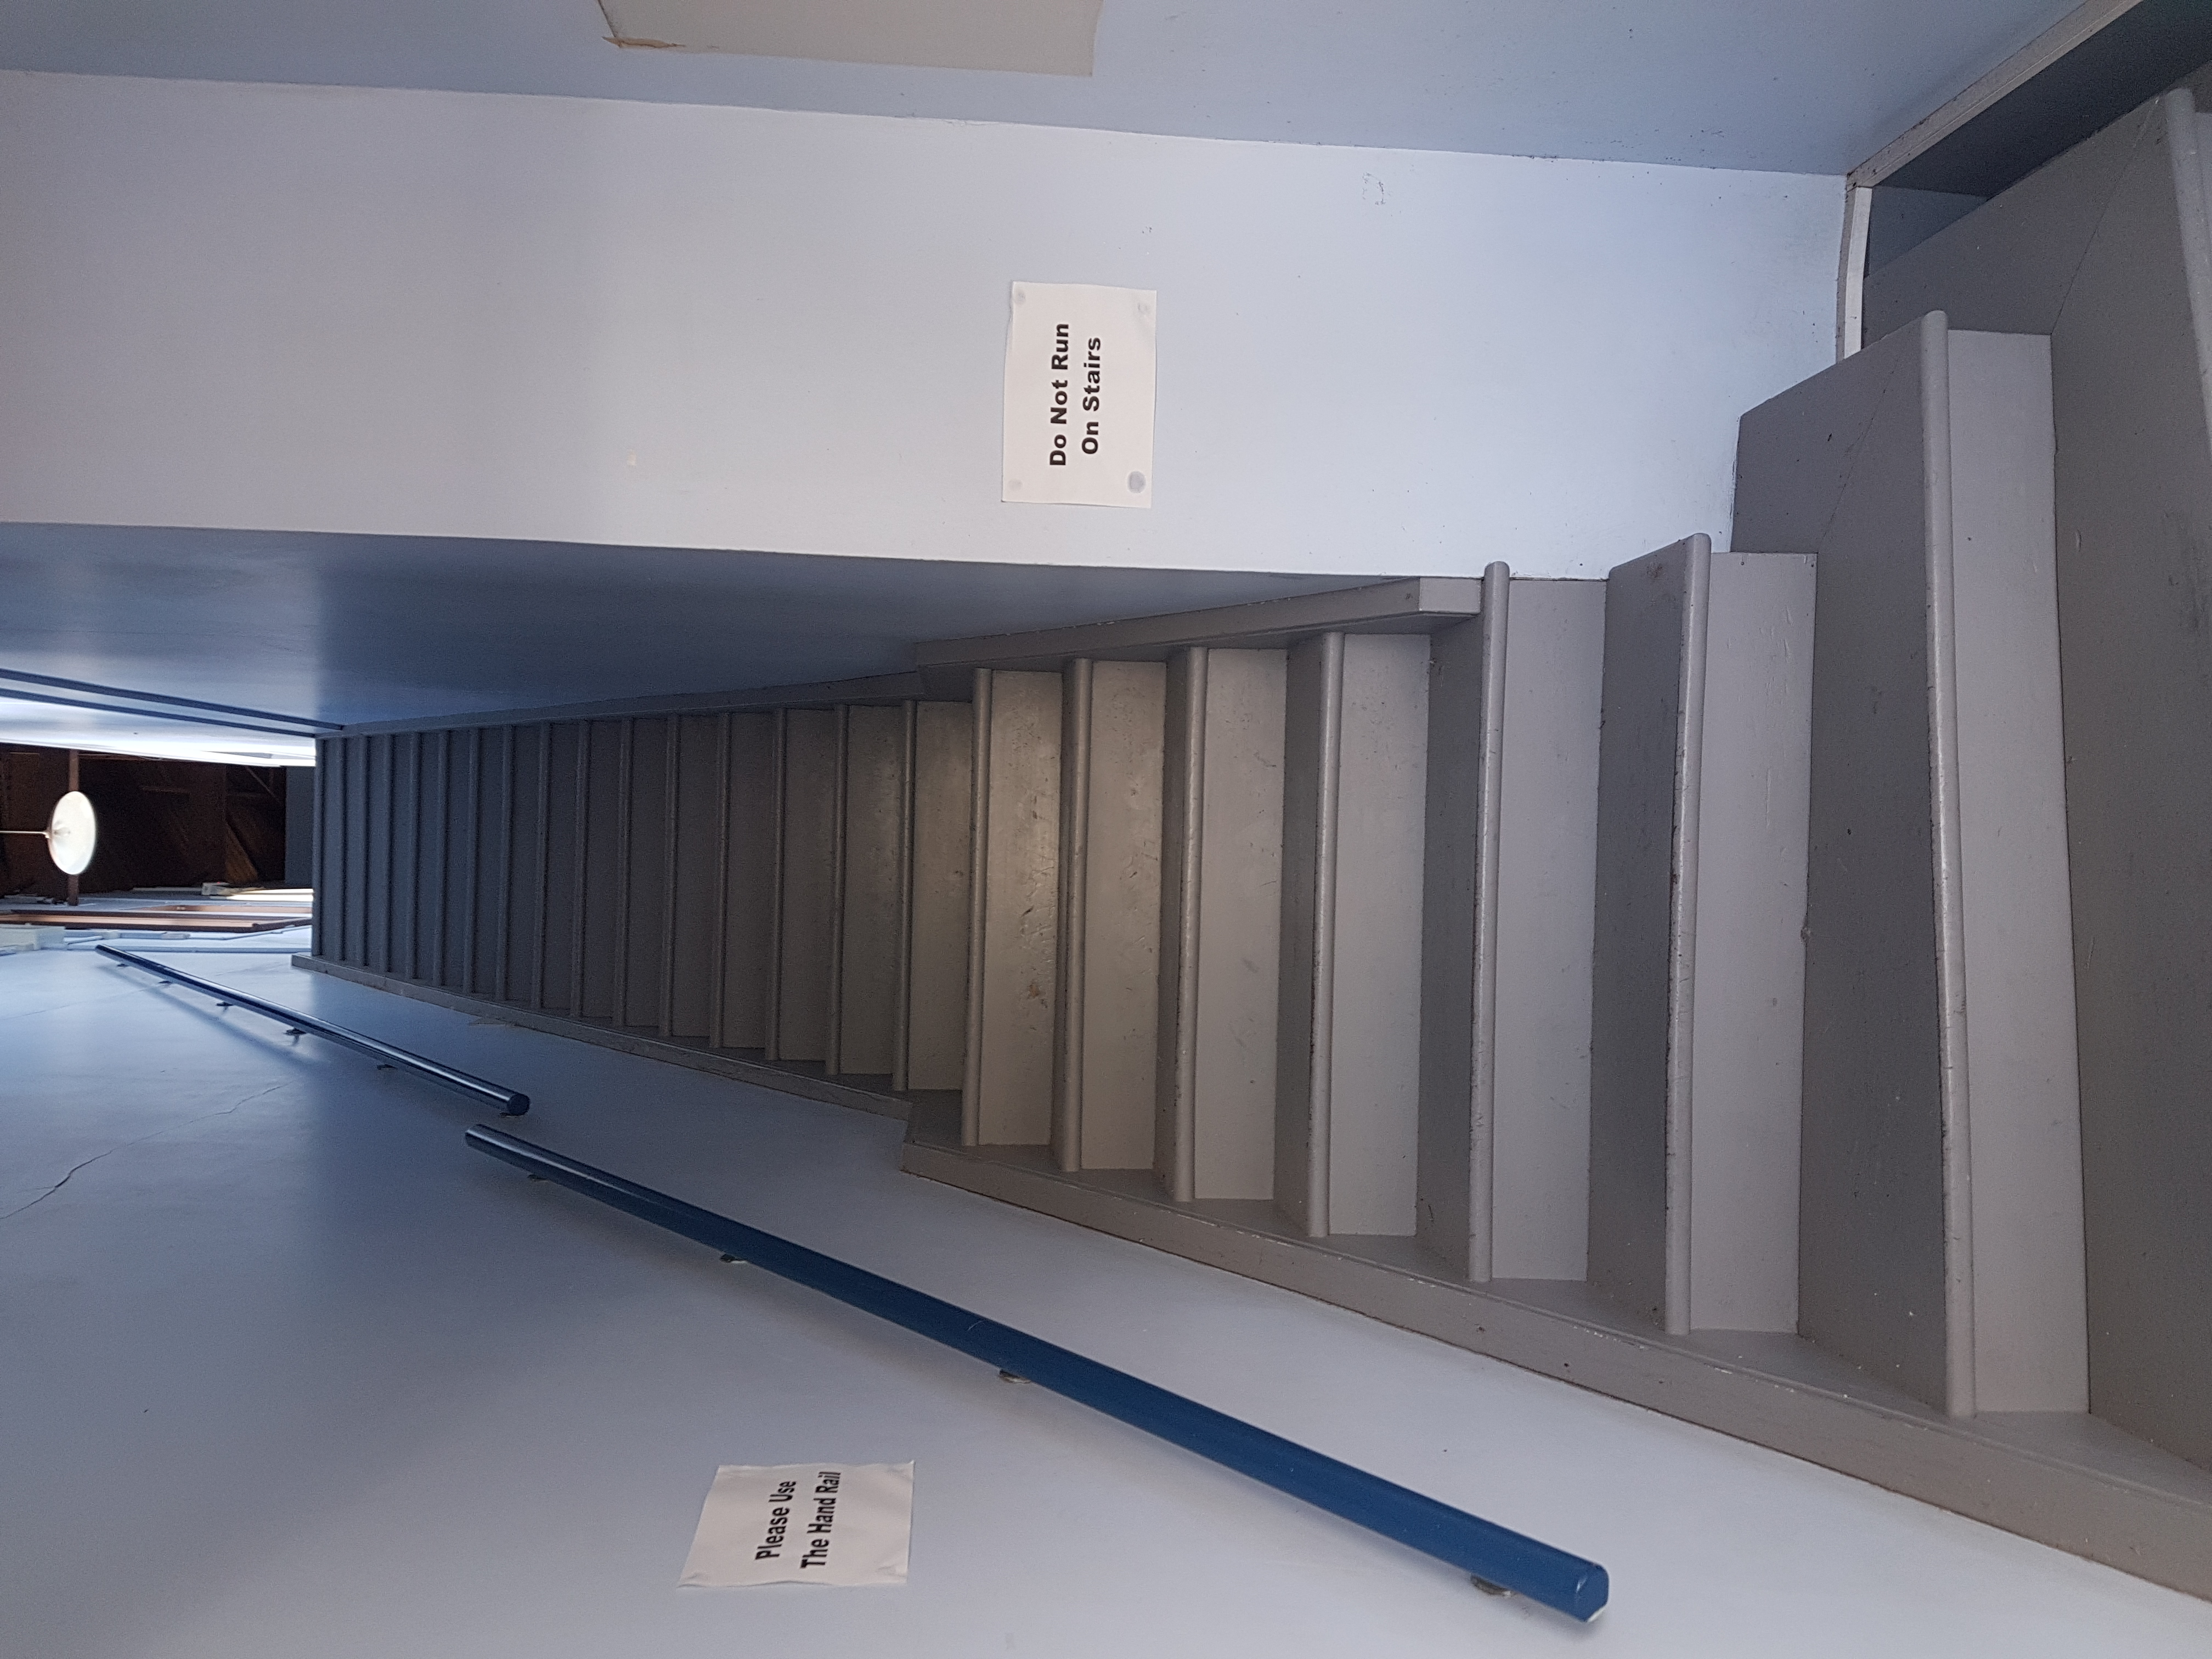 Gatakers Artspace internal staircase removed for lift